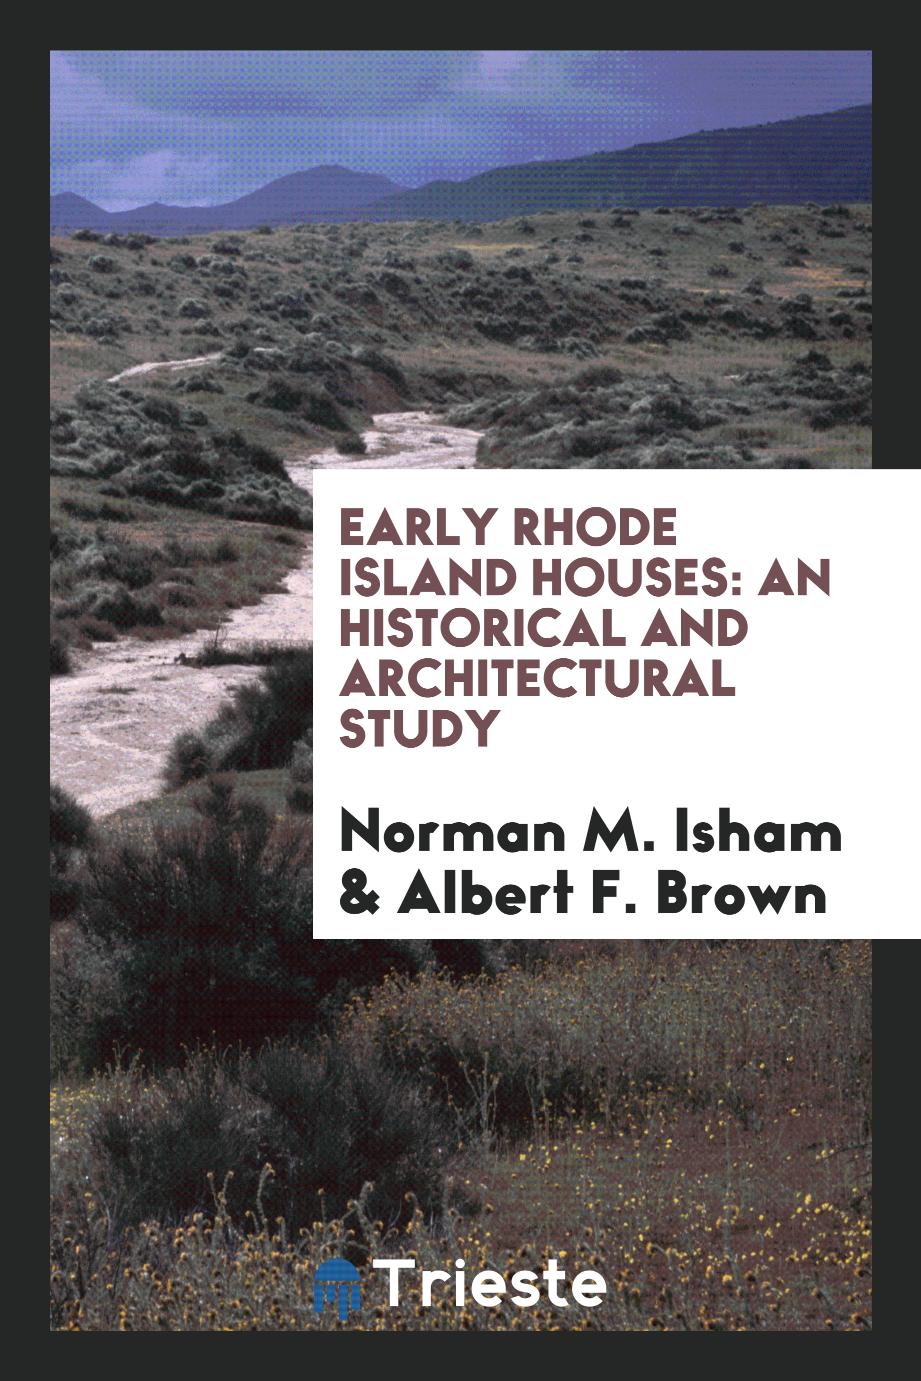 Early Rhode Island houses: an historical and architectural study